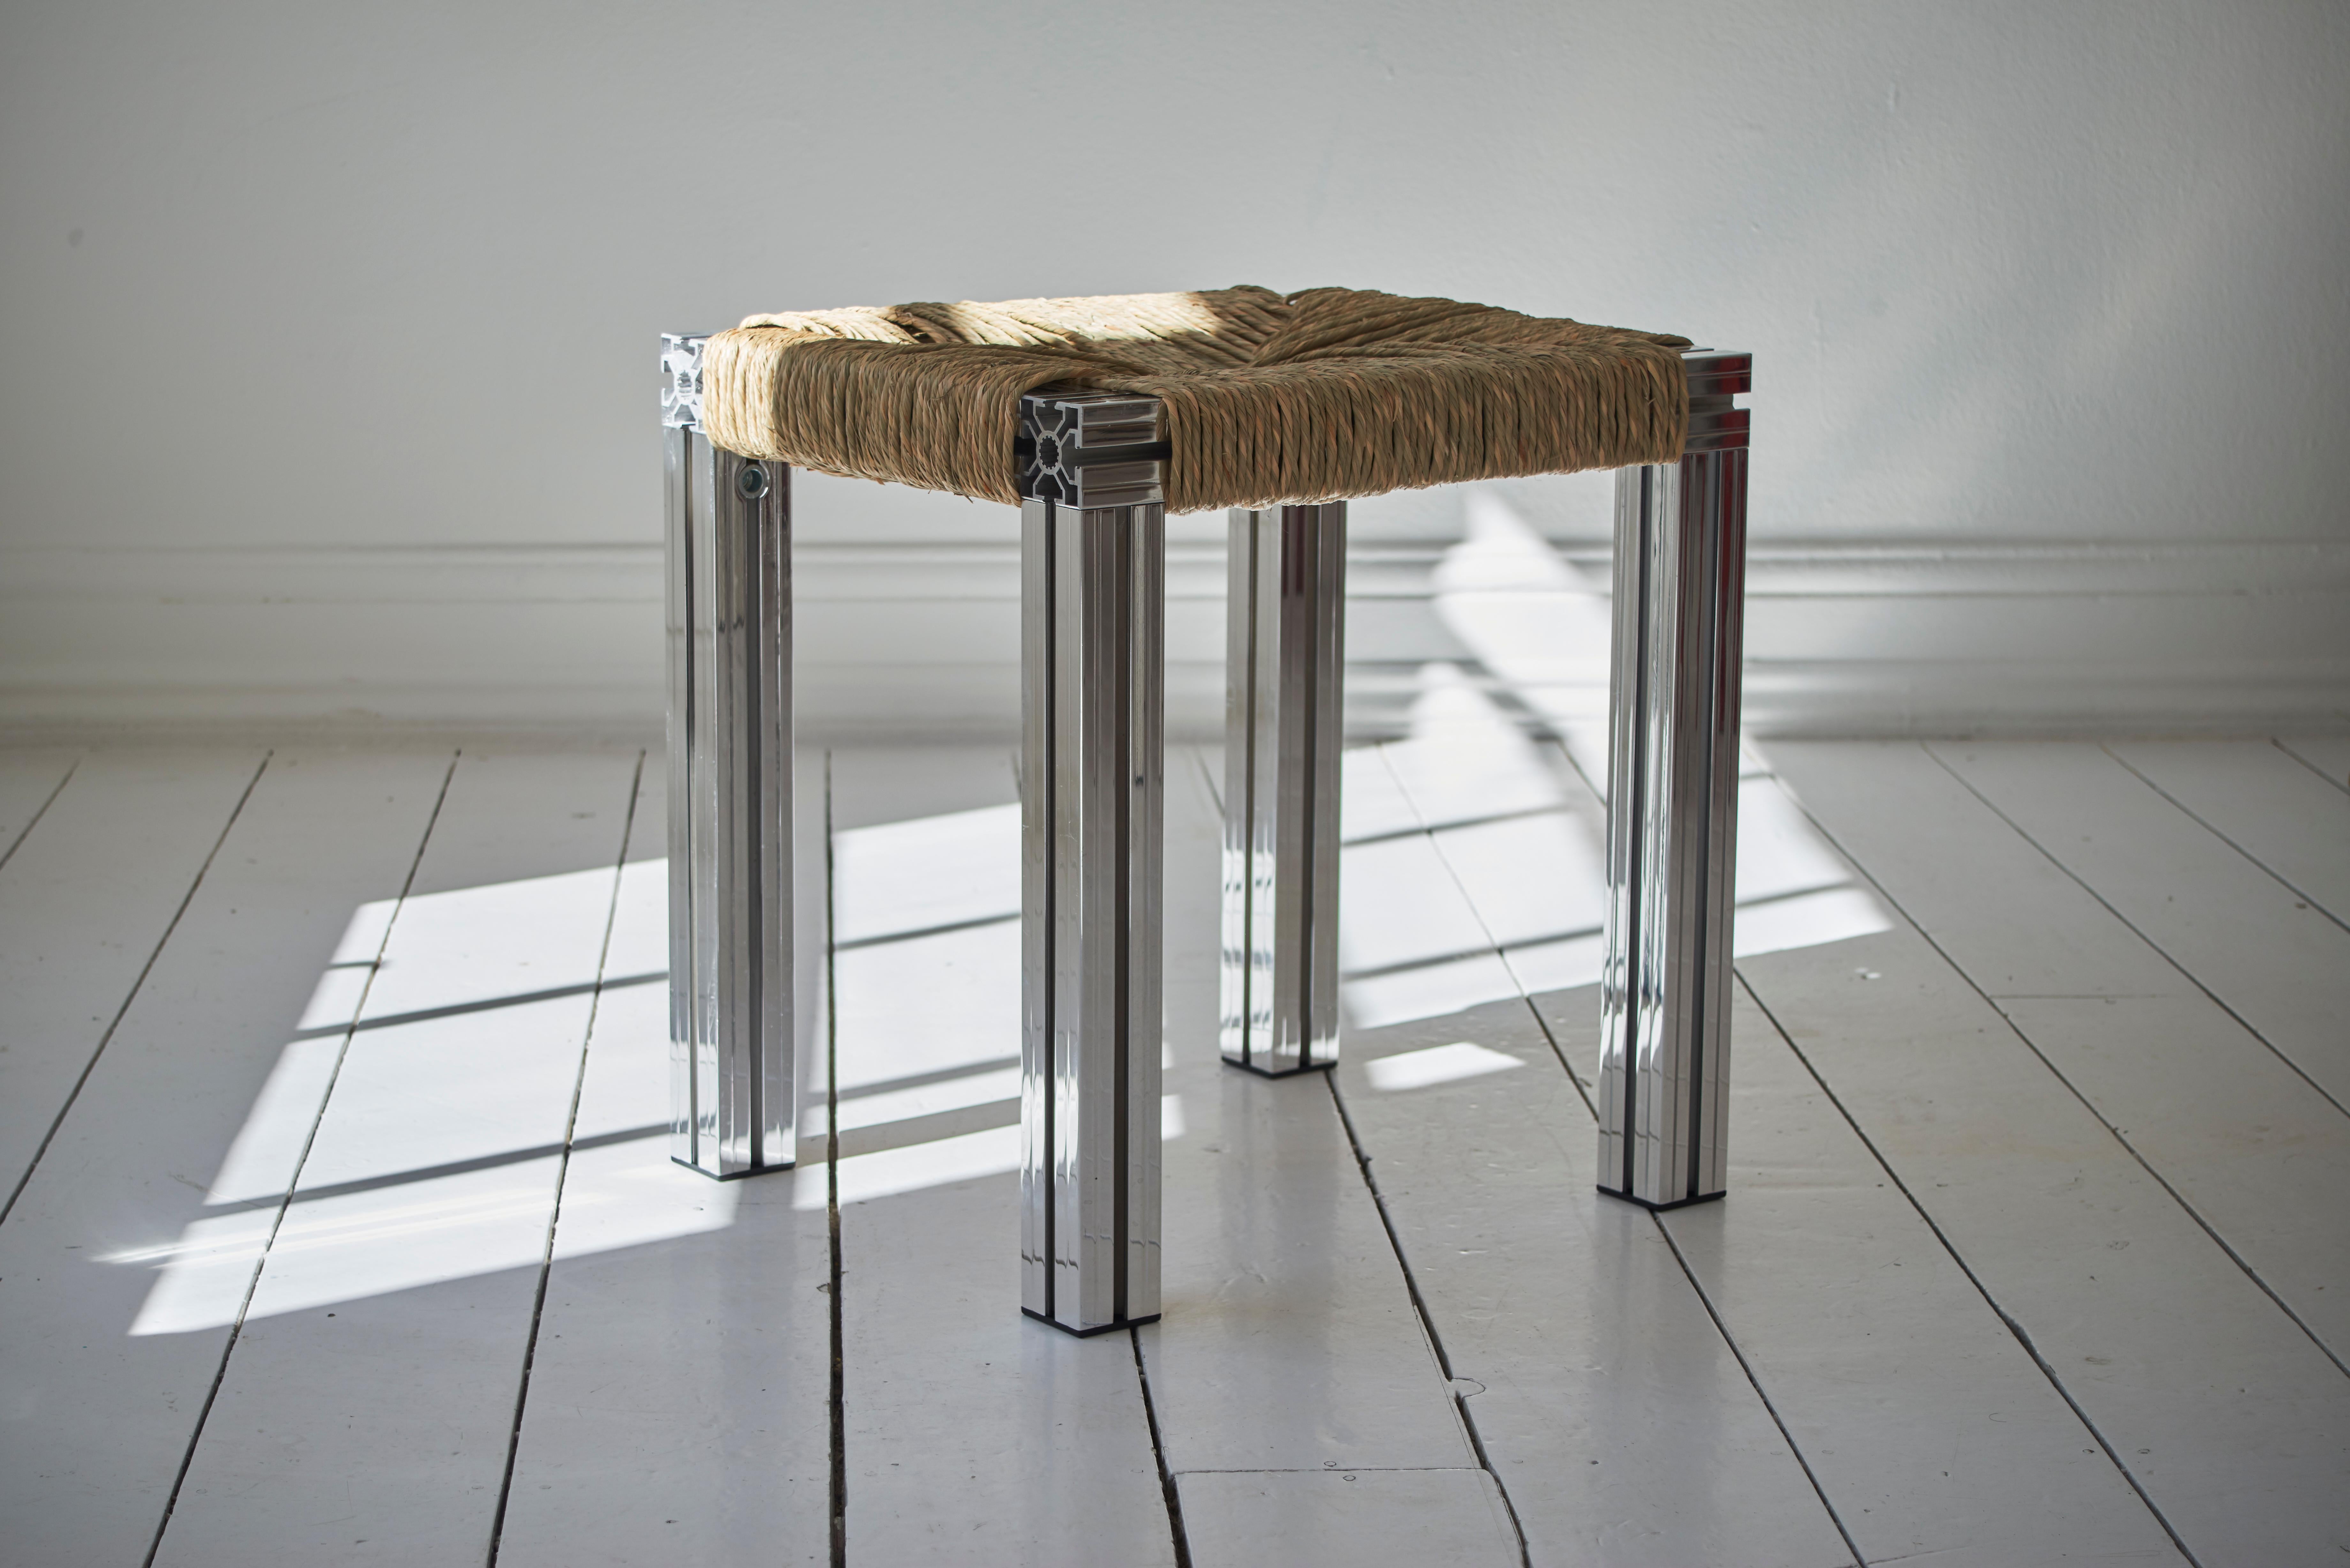 Mirror polished and rush weave wicker stool by Tino Seubert
Dimensions: D 43 x W 38 x H 45 cm.
Materials: Mirror polished aluminum extrusions, rush.

Tino Seubert
When he first made his now signature wicker and aluminium stools and benches in